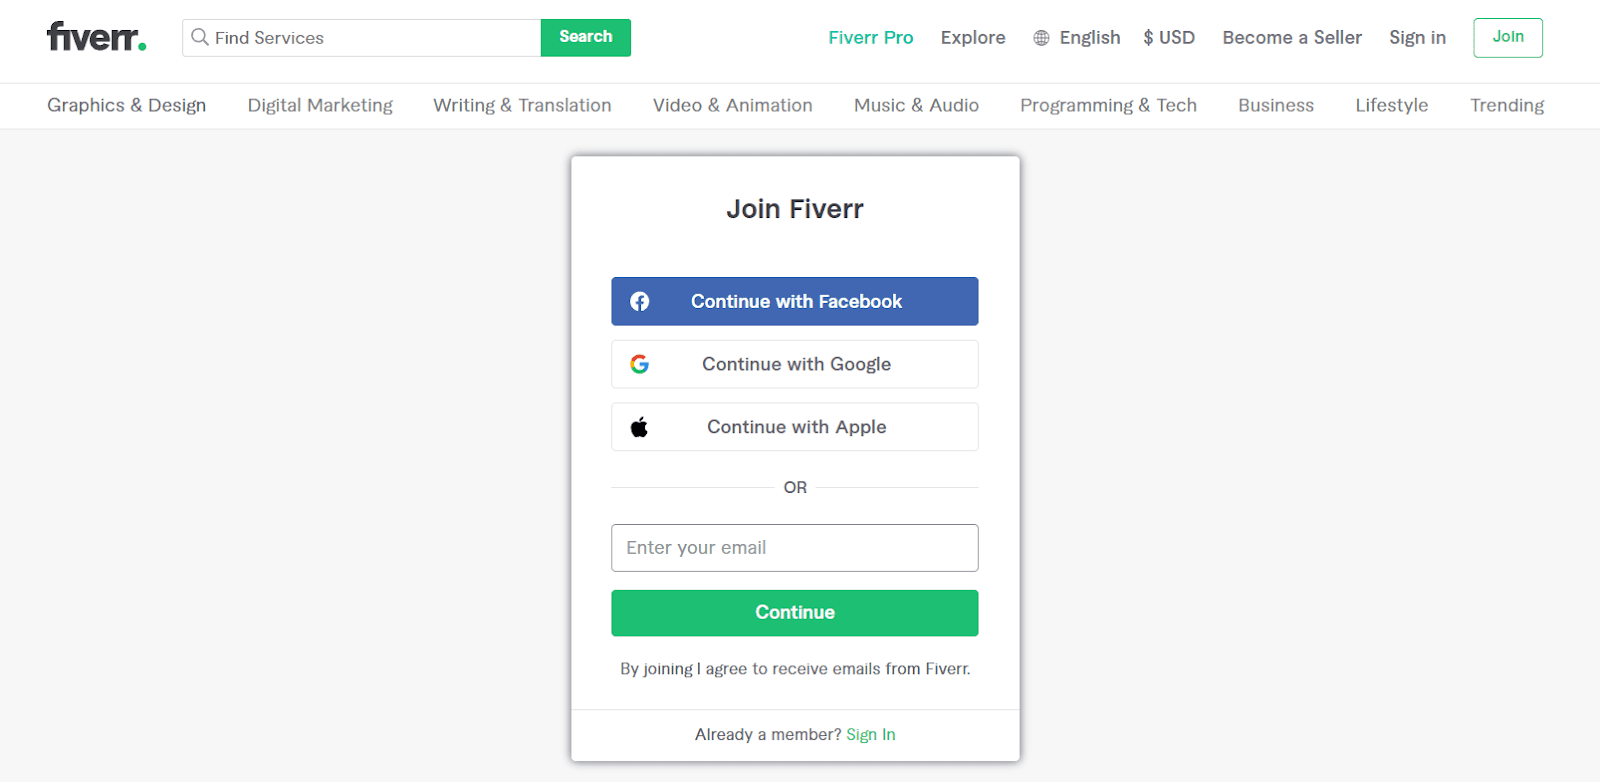 Fiverr sign up page